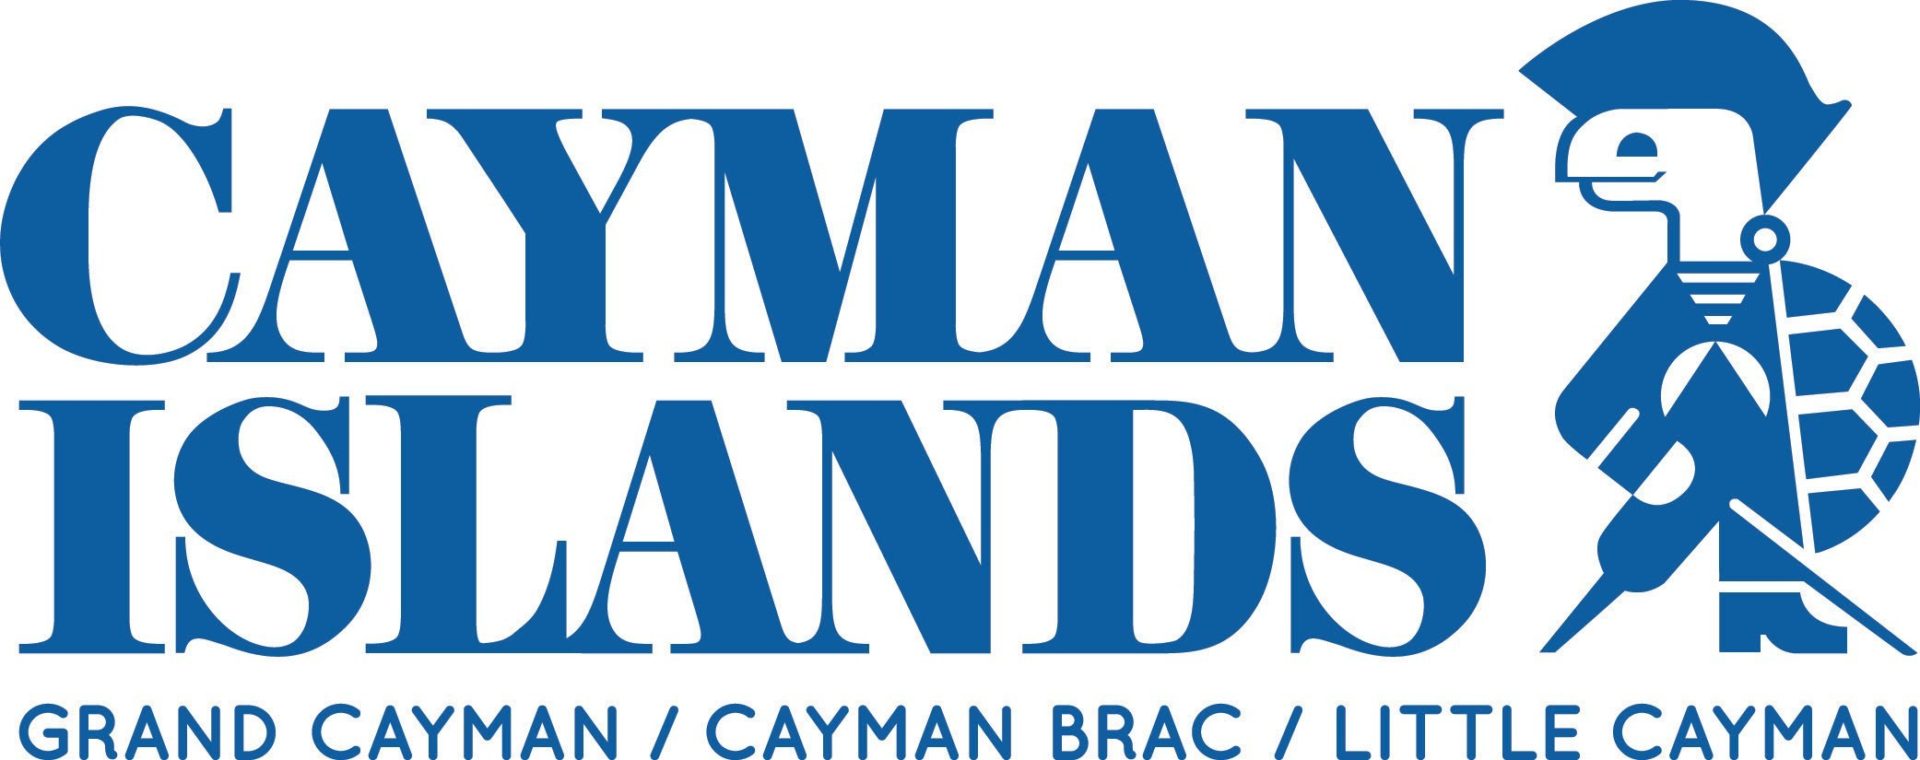 cayman islands department of tourism forms